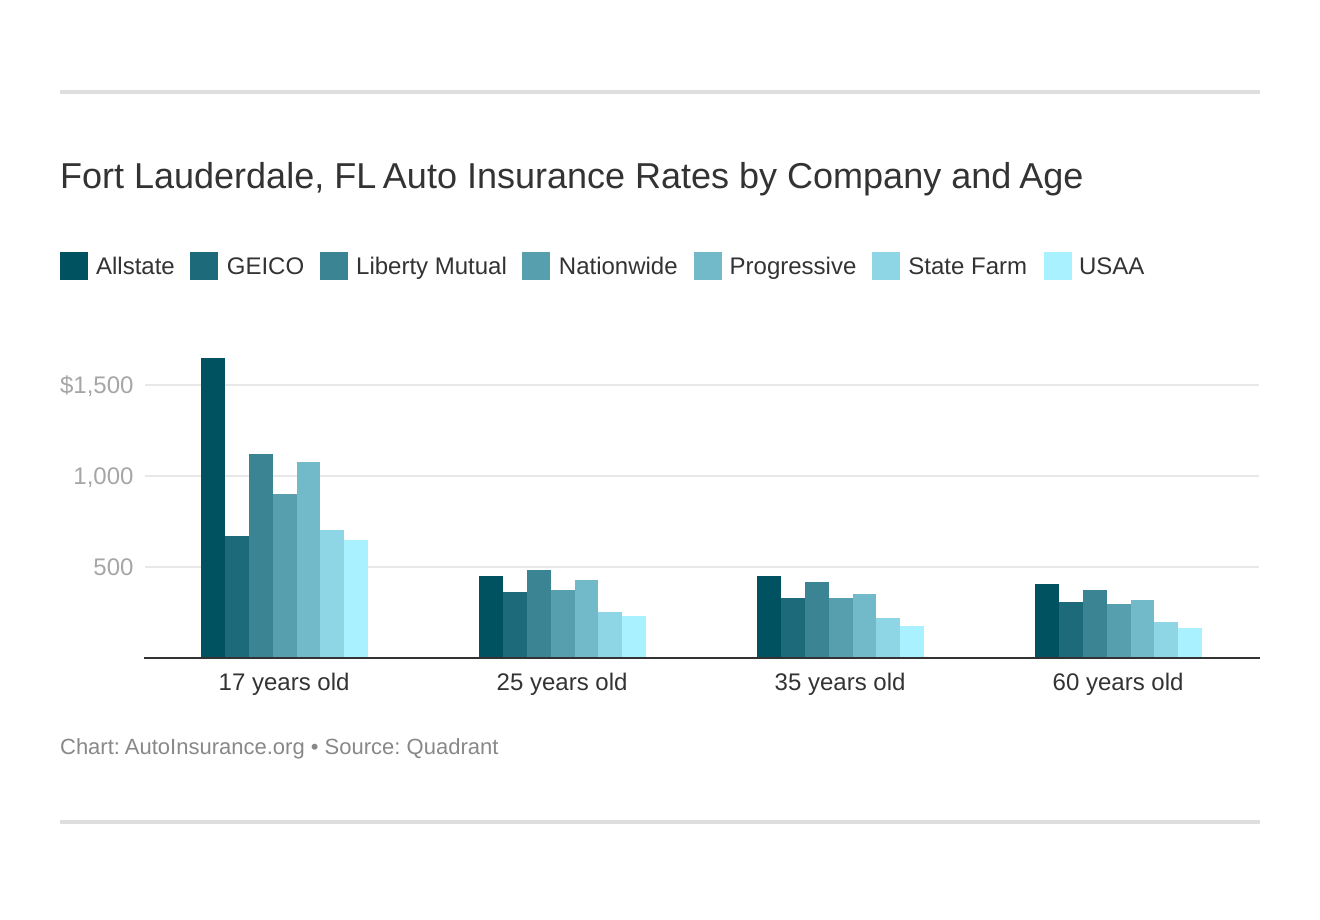 Fort Lauderdale, FL Auto Insurance Rates by Company and Age